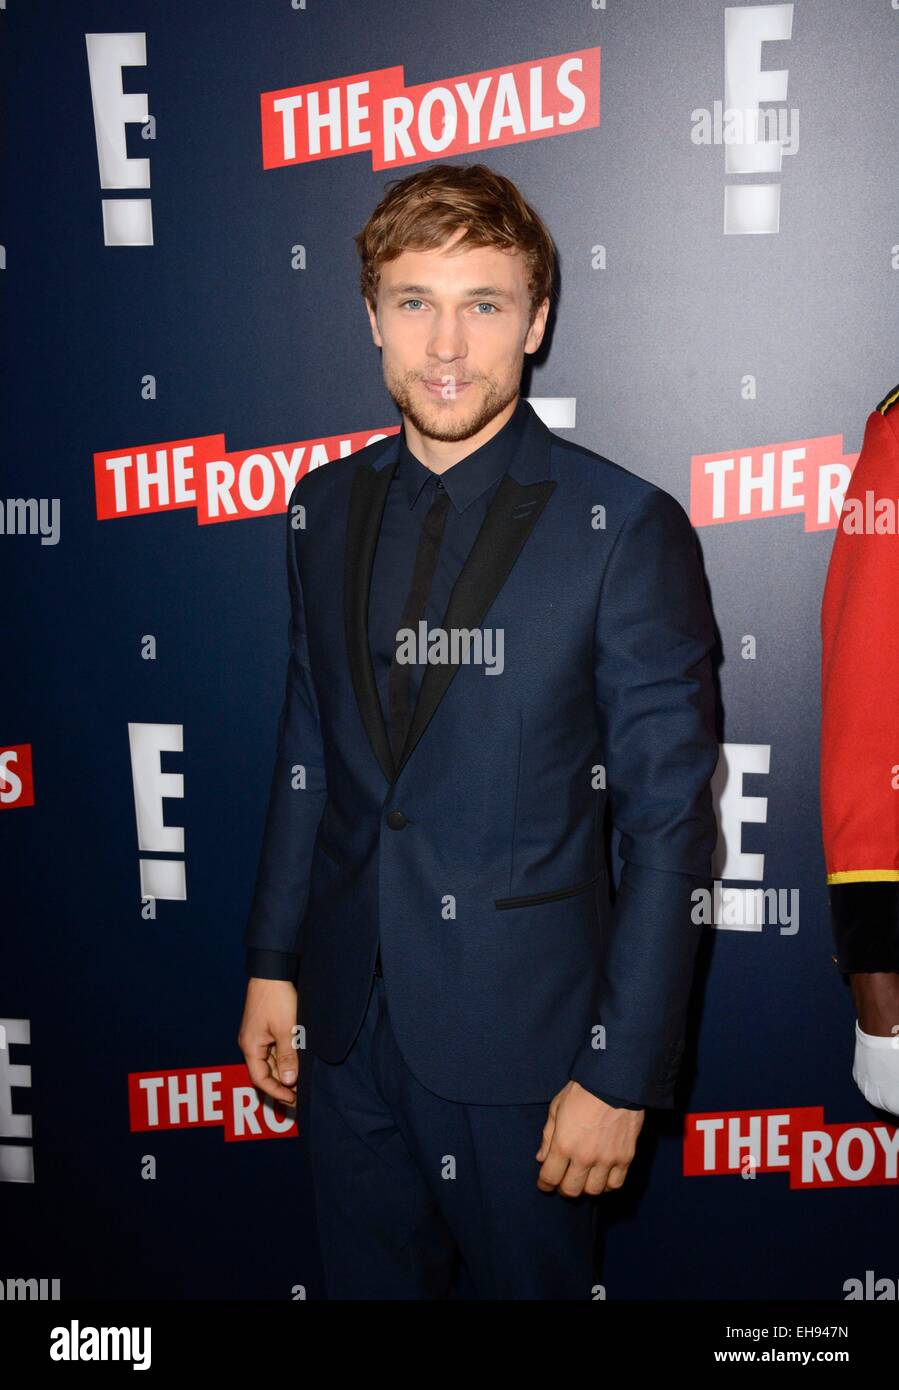 New York, NY, USA. 9th Mar, 2015. William Moseley at arrivals for THE ROYALS Series Premiere on E!, The Top of The Standard, New York, NY March 9, 2015. Credit:  Derek Storm/Everett Collection/Alamy Live News Stock Photo